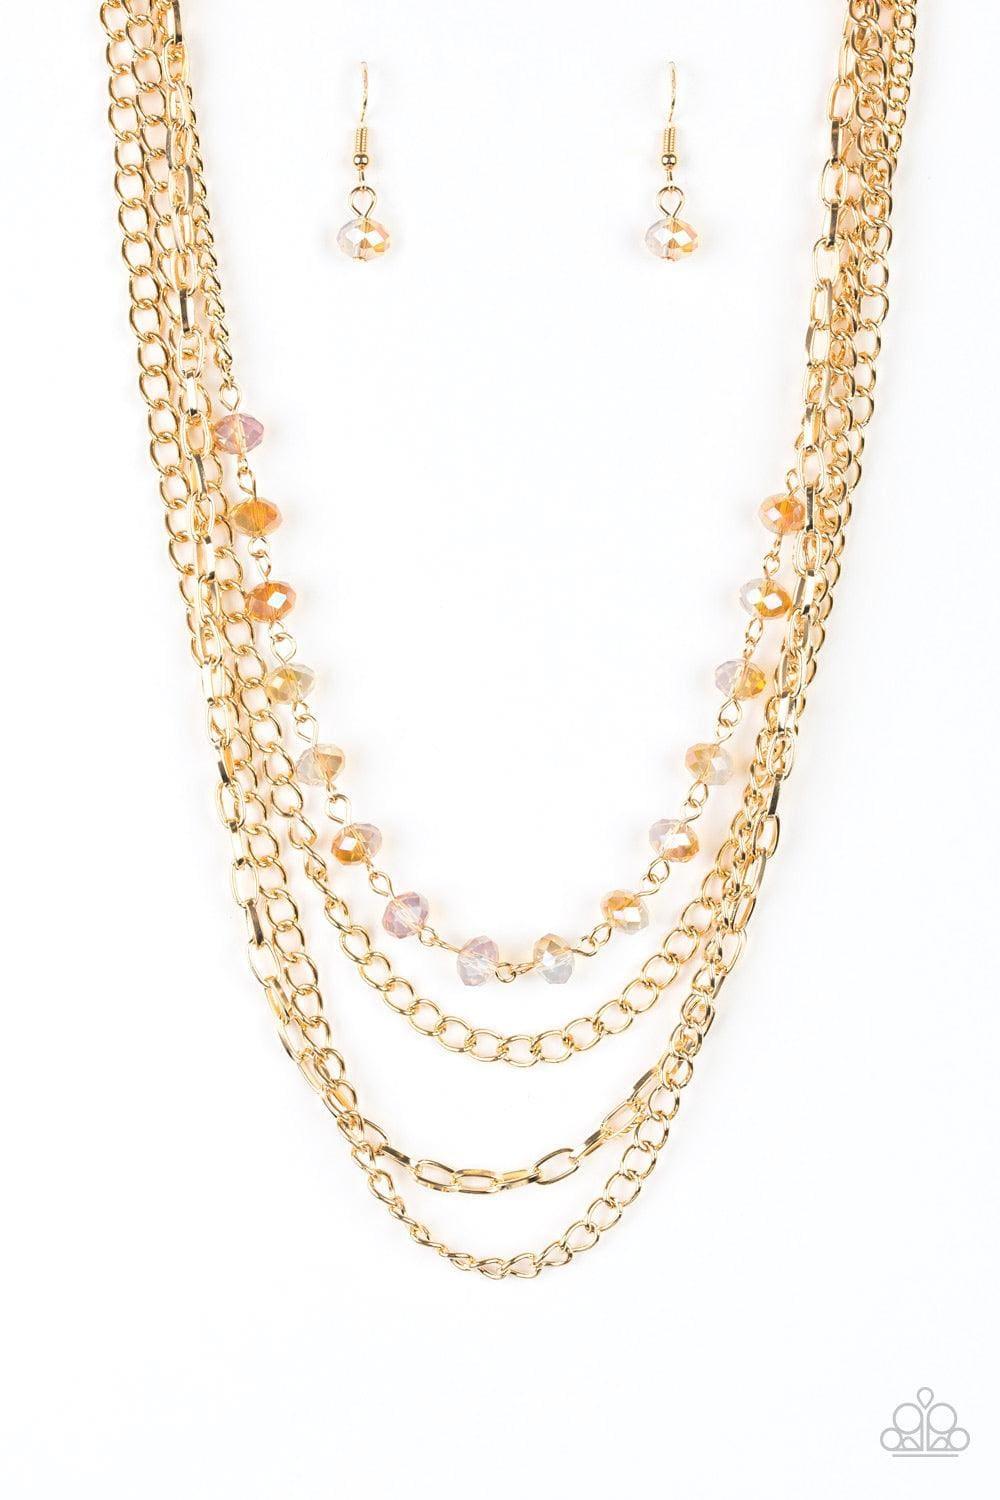 Paparazzi Accessories - Extravagant Elegance - Gold Necklace - Bling by JessieK